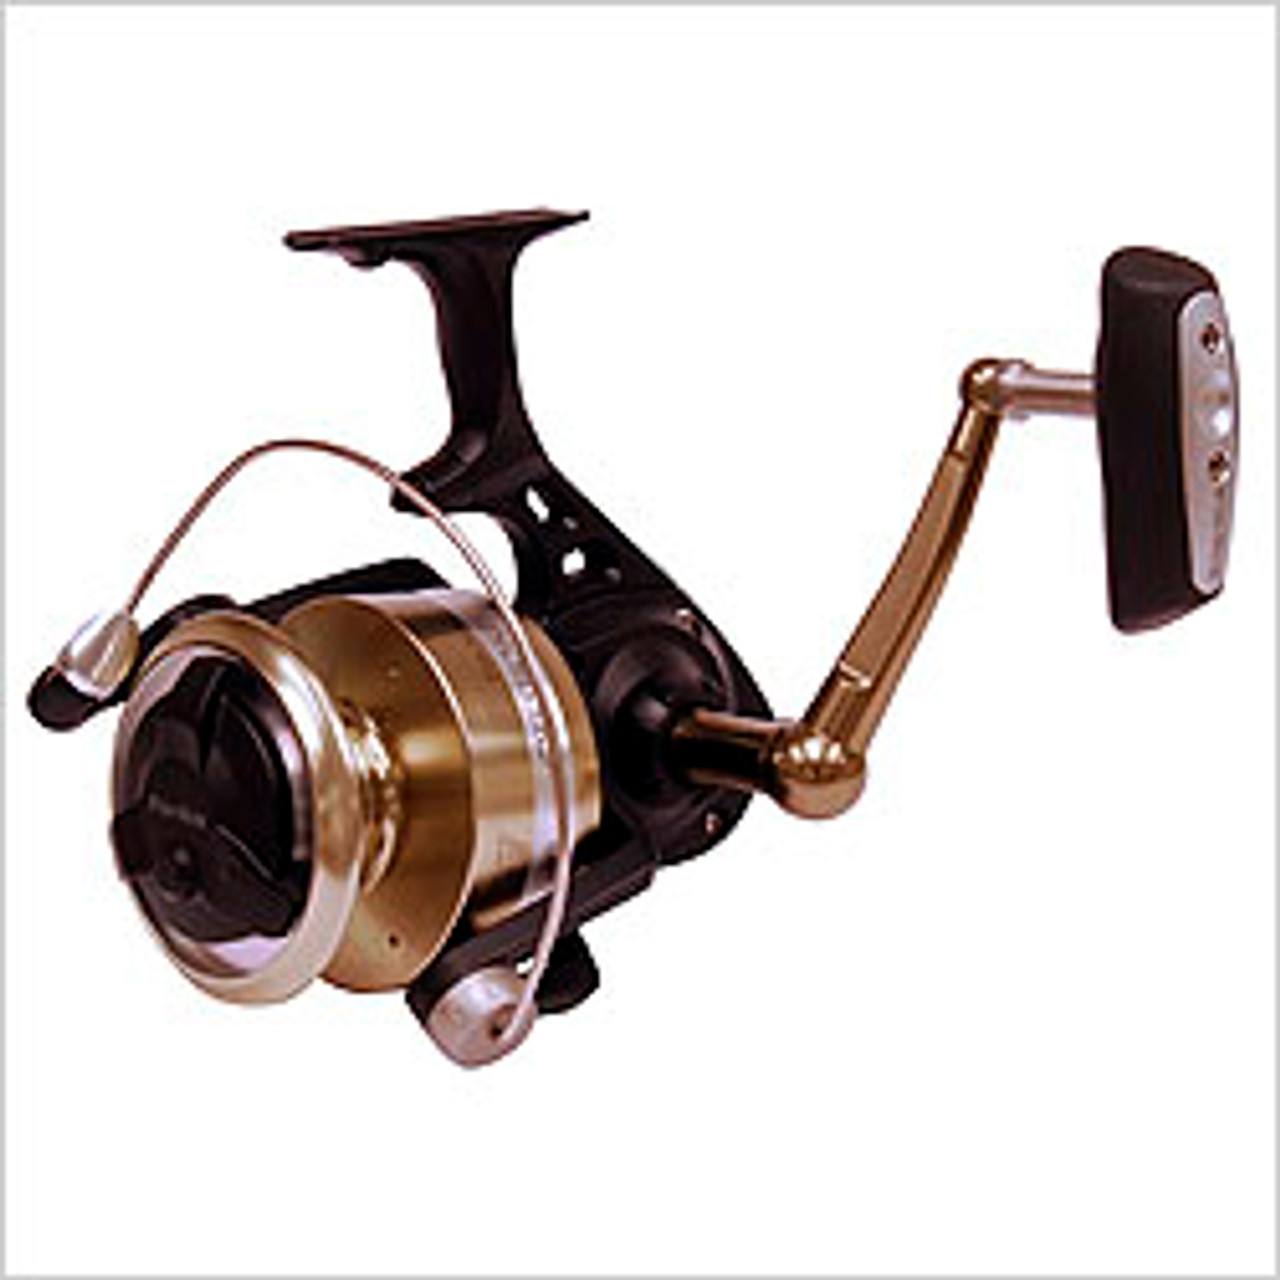 https://cdn11.bigcommerce.com/s-pr9amv4/images/stencil/1280x1280/products/43457/52497/Fin_nor_Offshore_spinning_reel__33195.1455573652.jpg?c=2